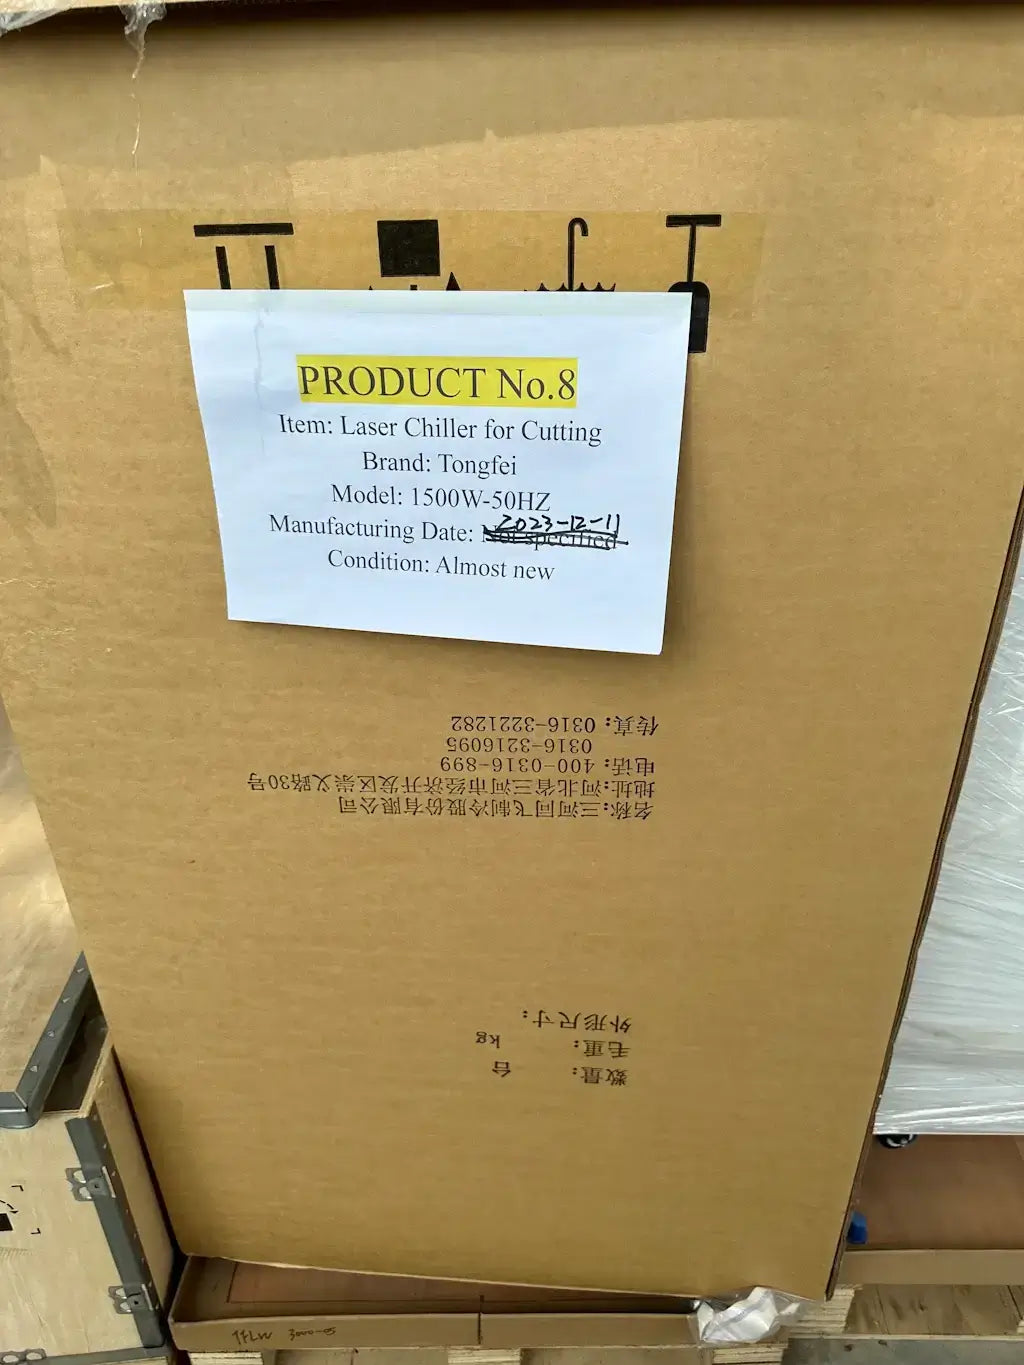 Tongfei Laser Chiller 1500W-50HZ in cardboard box with label showing manufacturing date of Dec 2023, in almost new condition